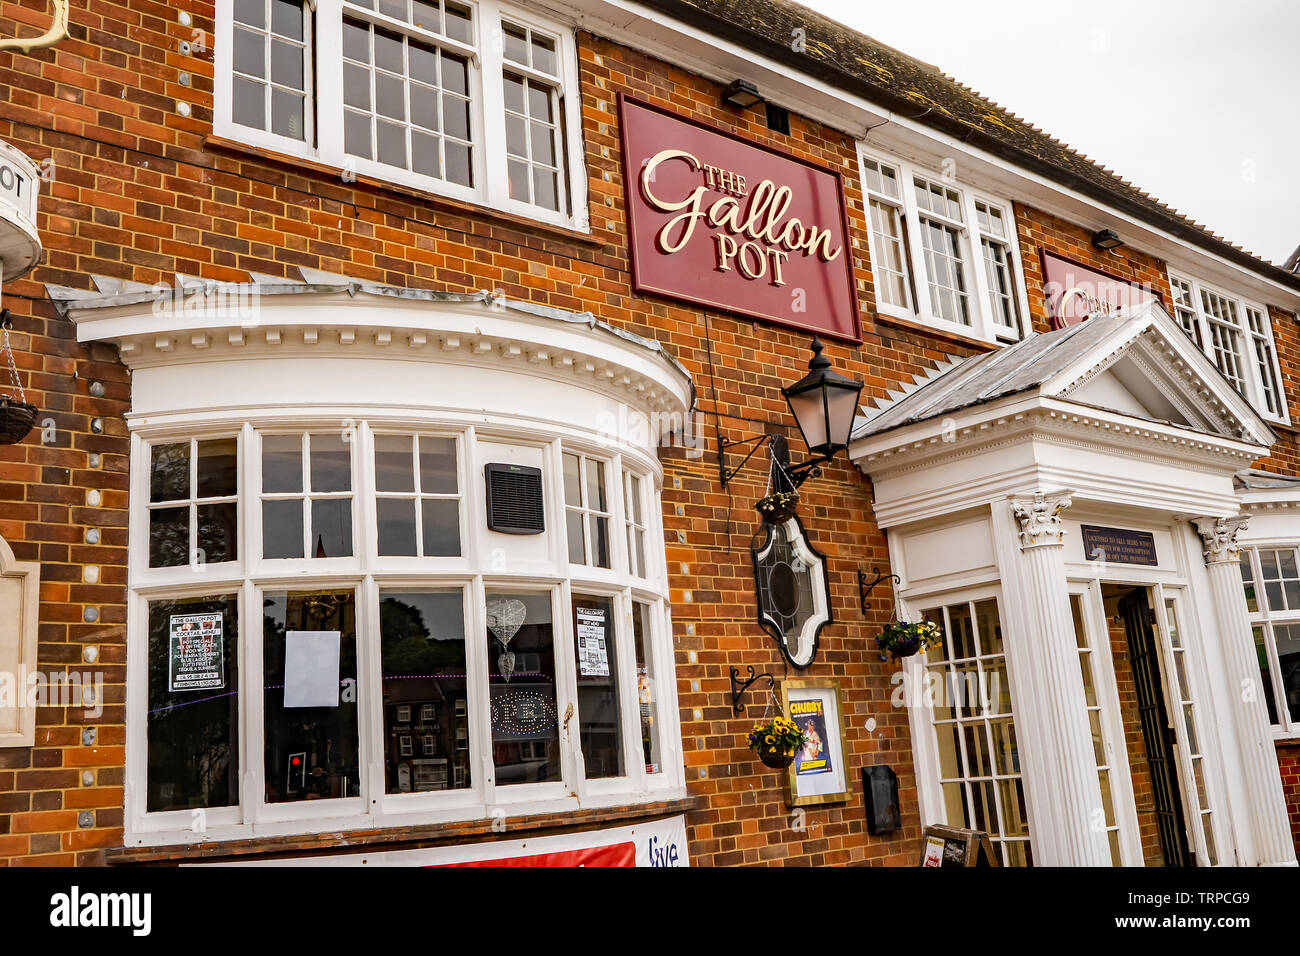 The front of the Gallon Pot, a well known and popular pub in the seaside town of Great Yarmouth Stock Photo